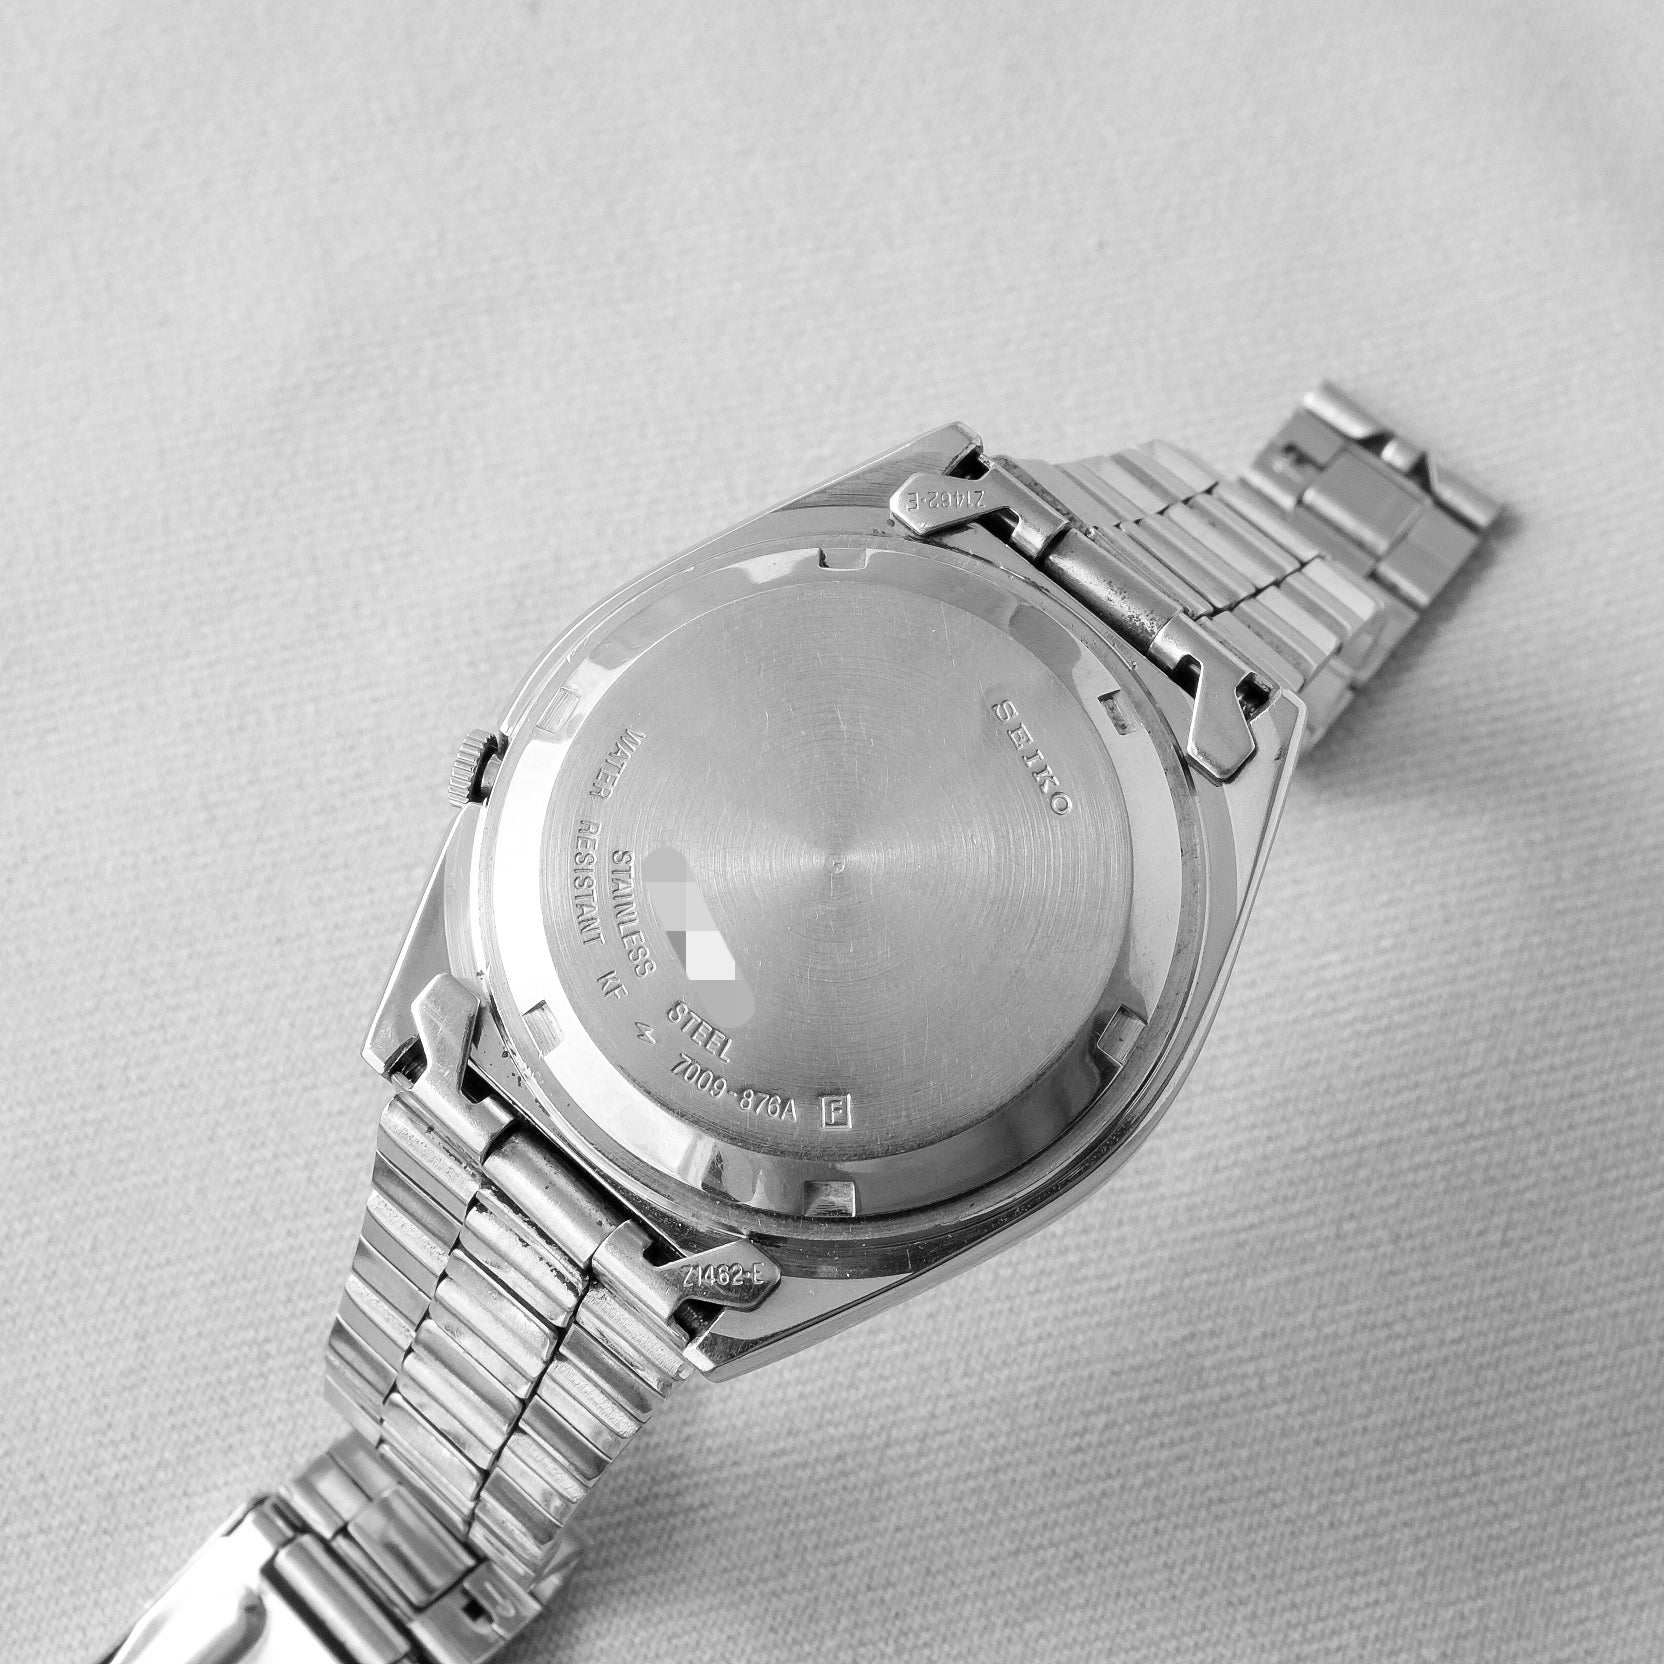 Seiko 7009-876A from 1989